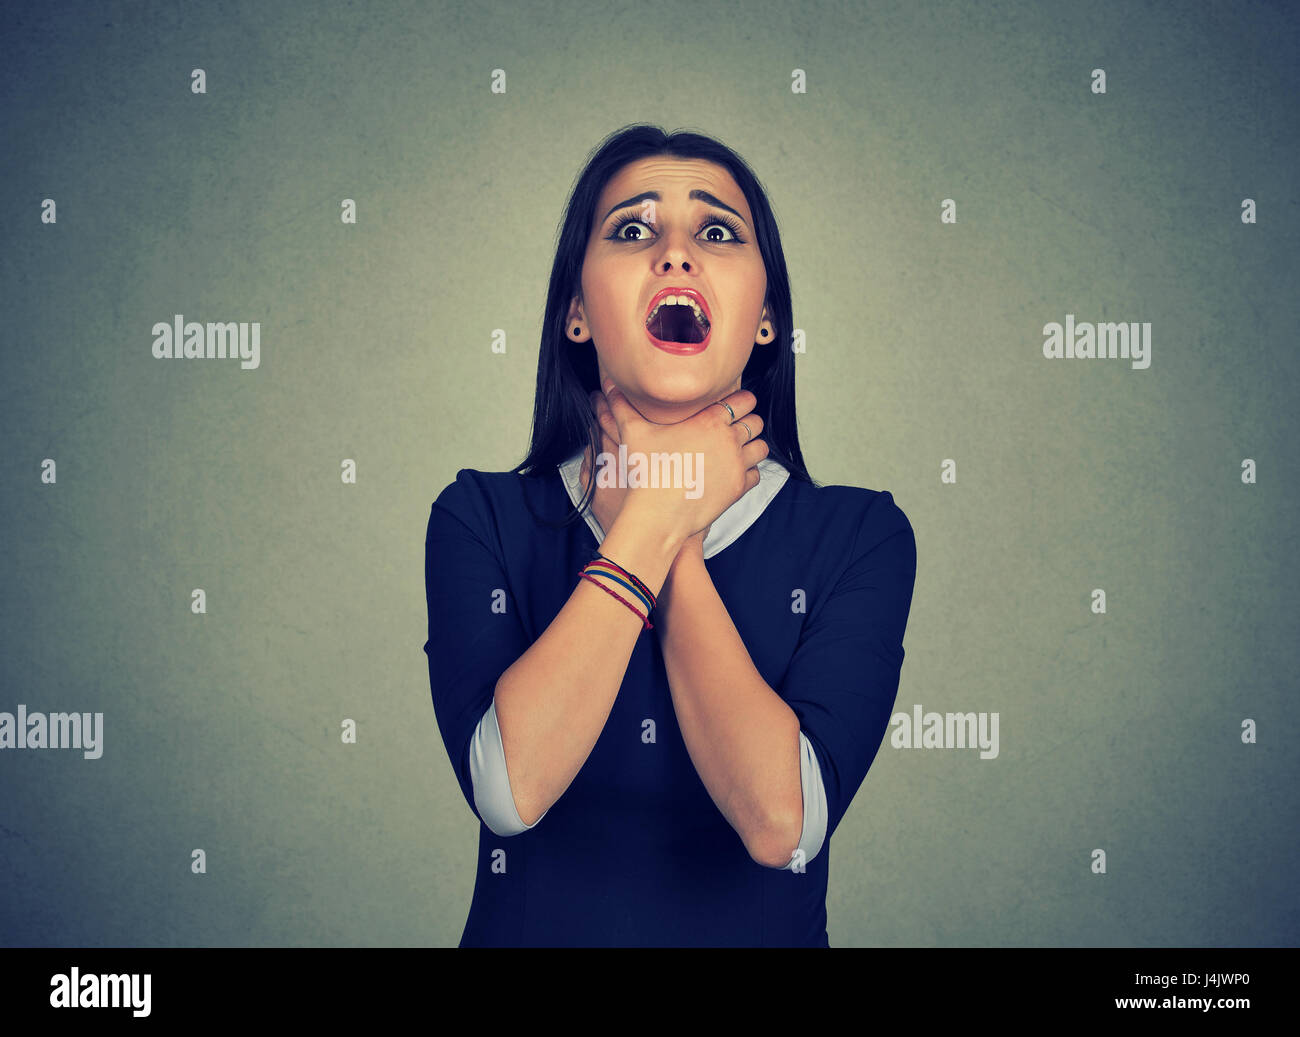 Young woman having asthma attack or choking can't breath suffering from respiration problems isolated on gray background Stock Photo